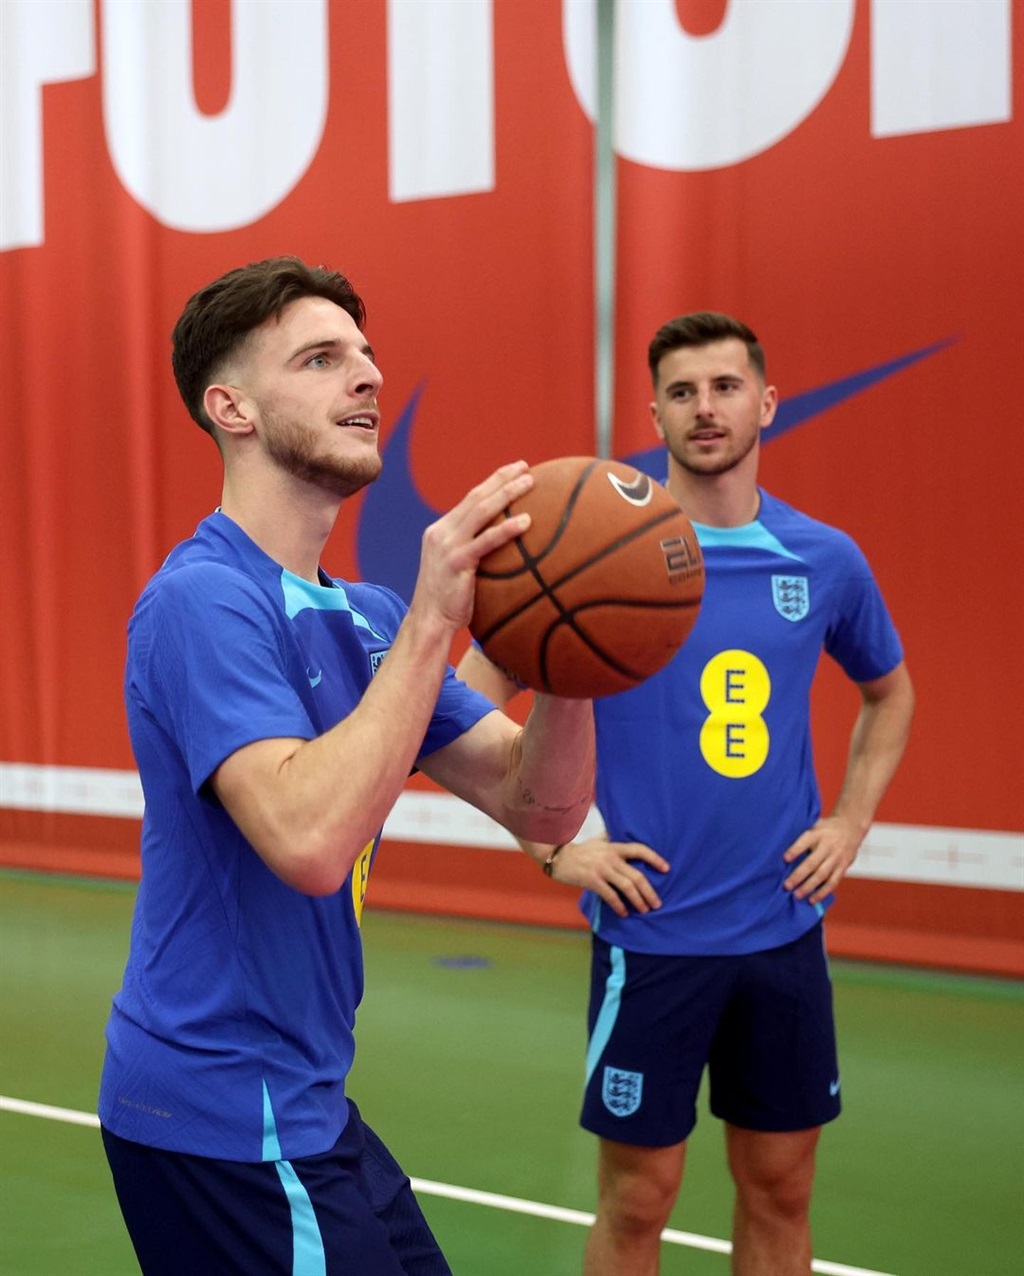 England stars shooting some hoops during their down time in Qatar.